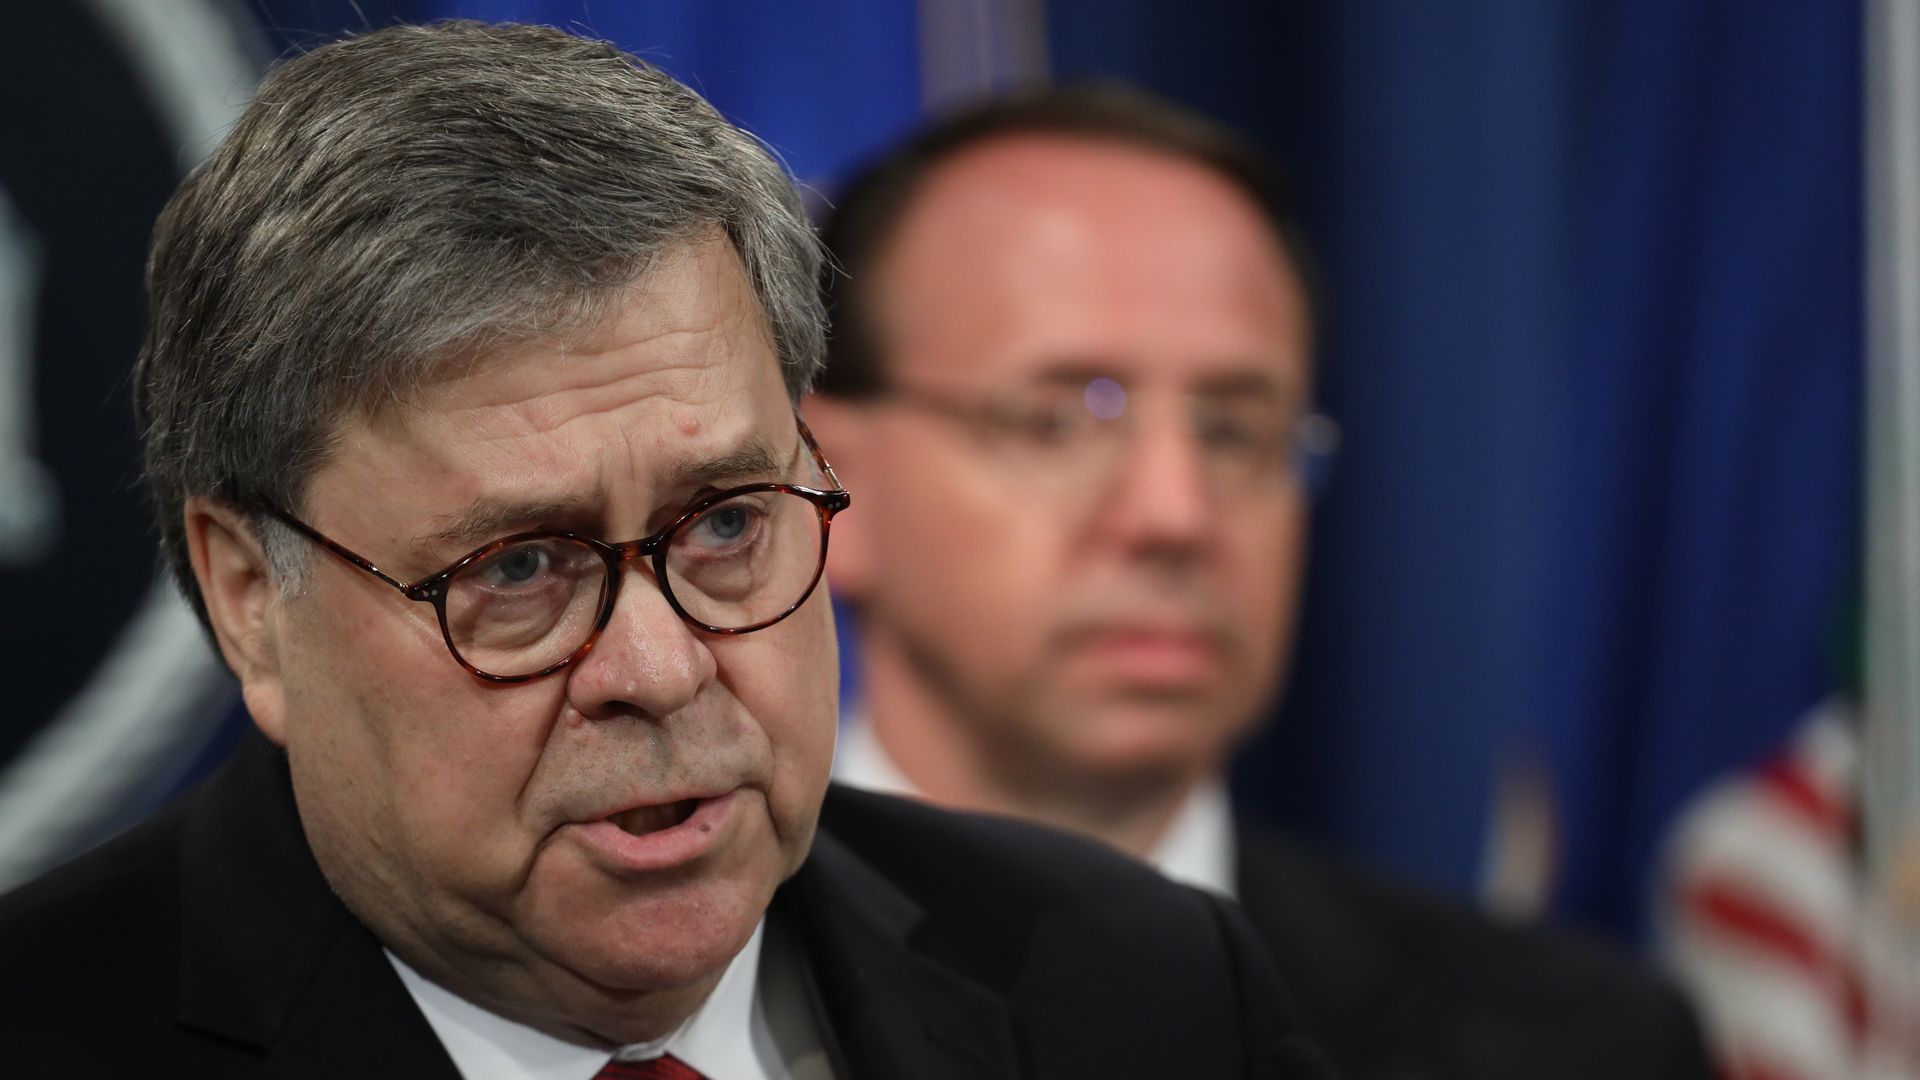 In this image, Barr speaks to a crowd